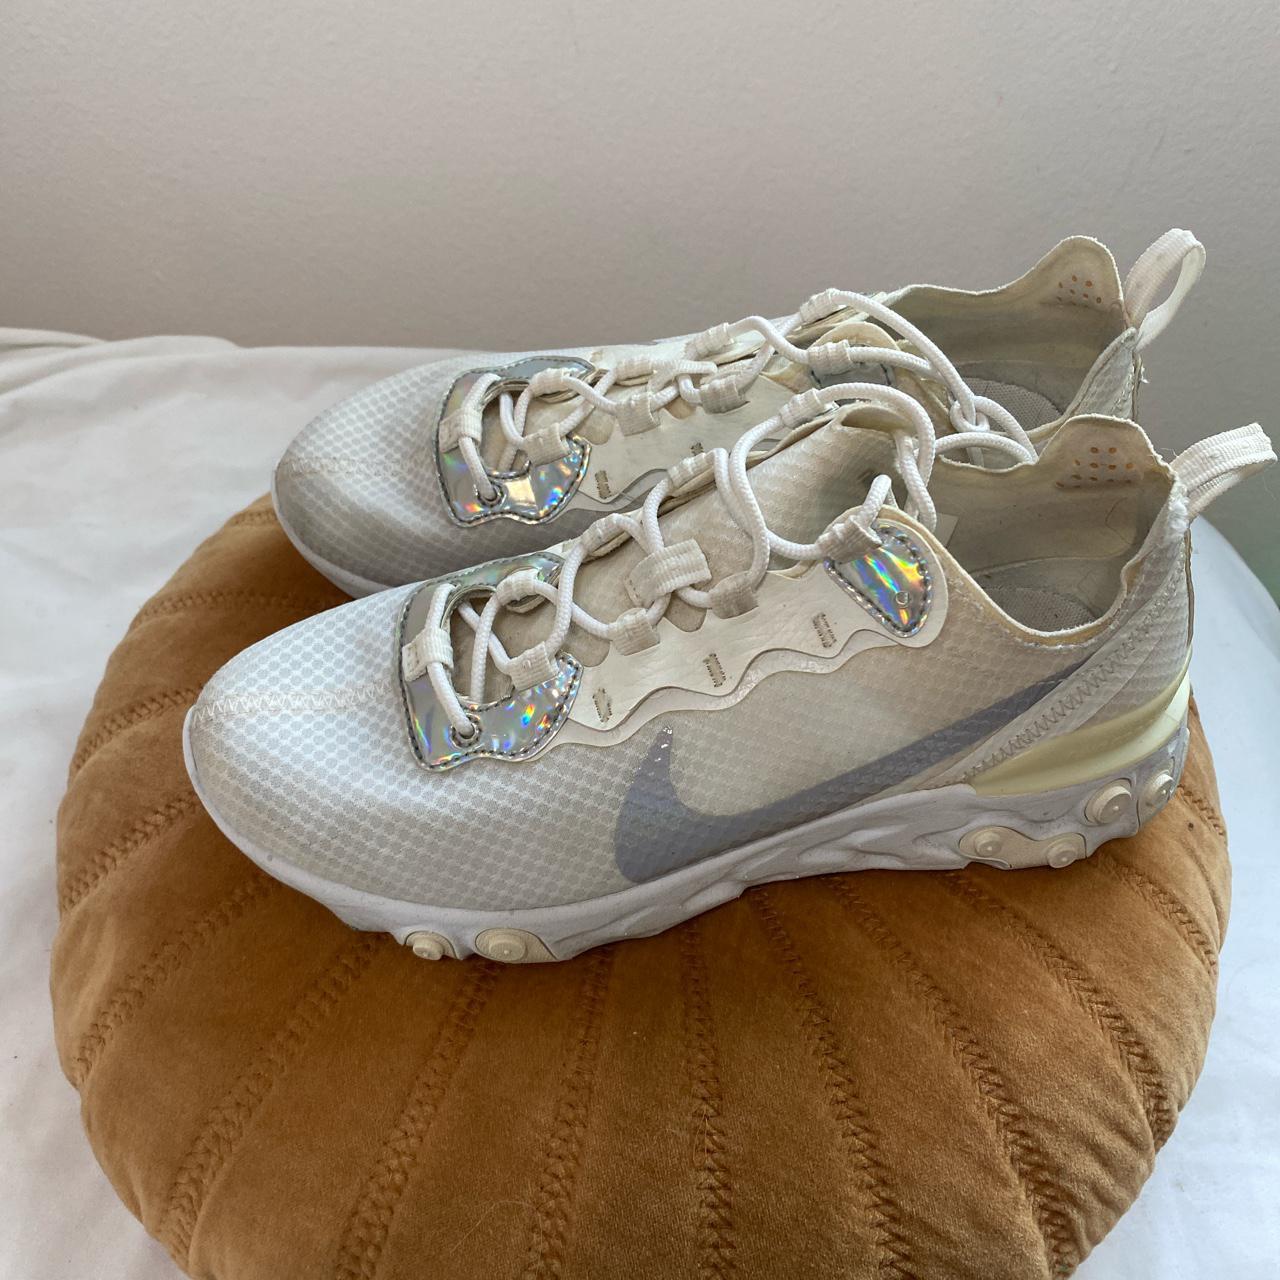 Product Image 1 - Nike react in summit white